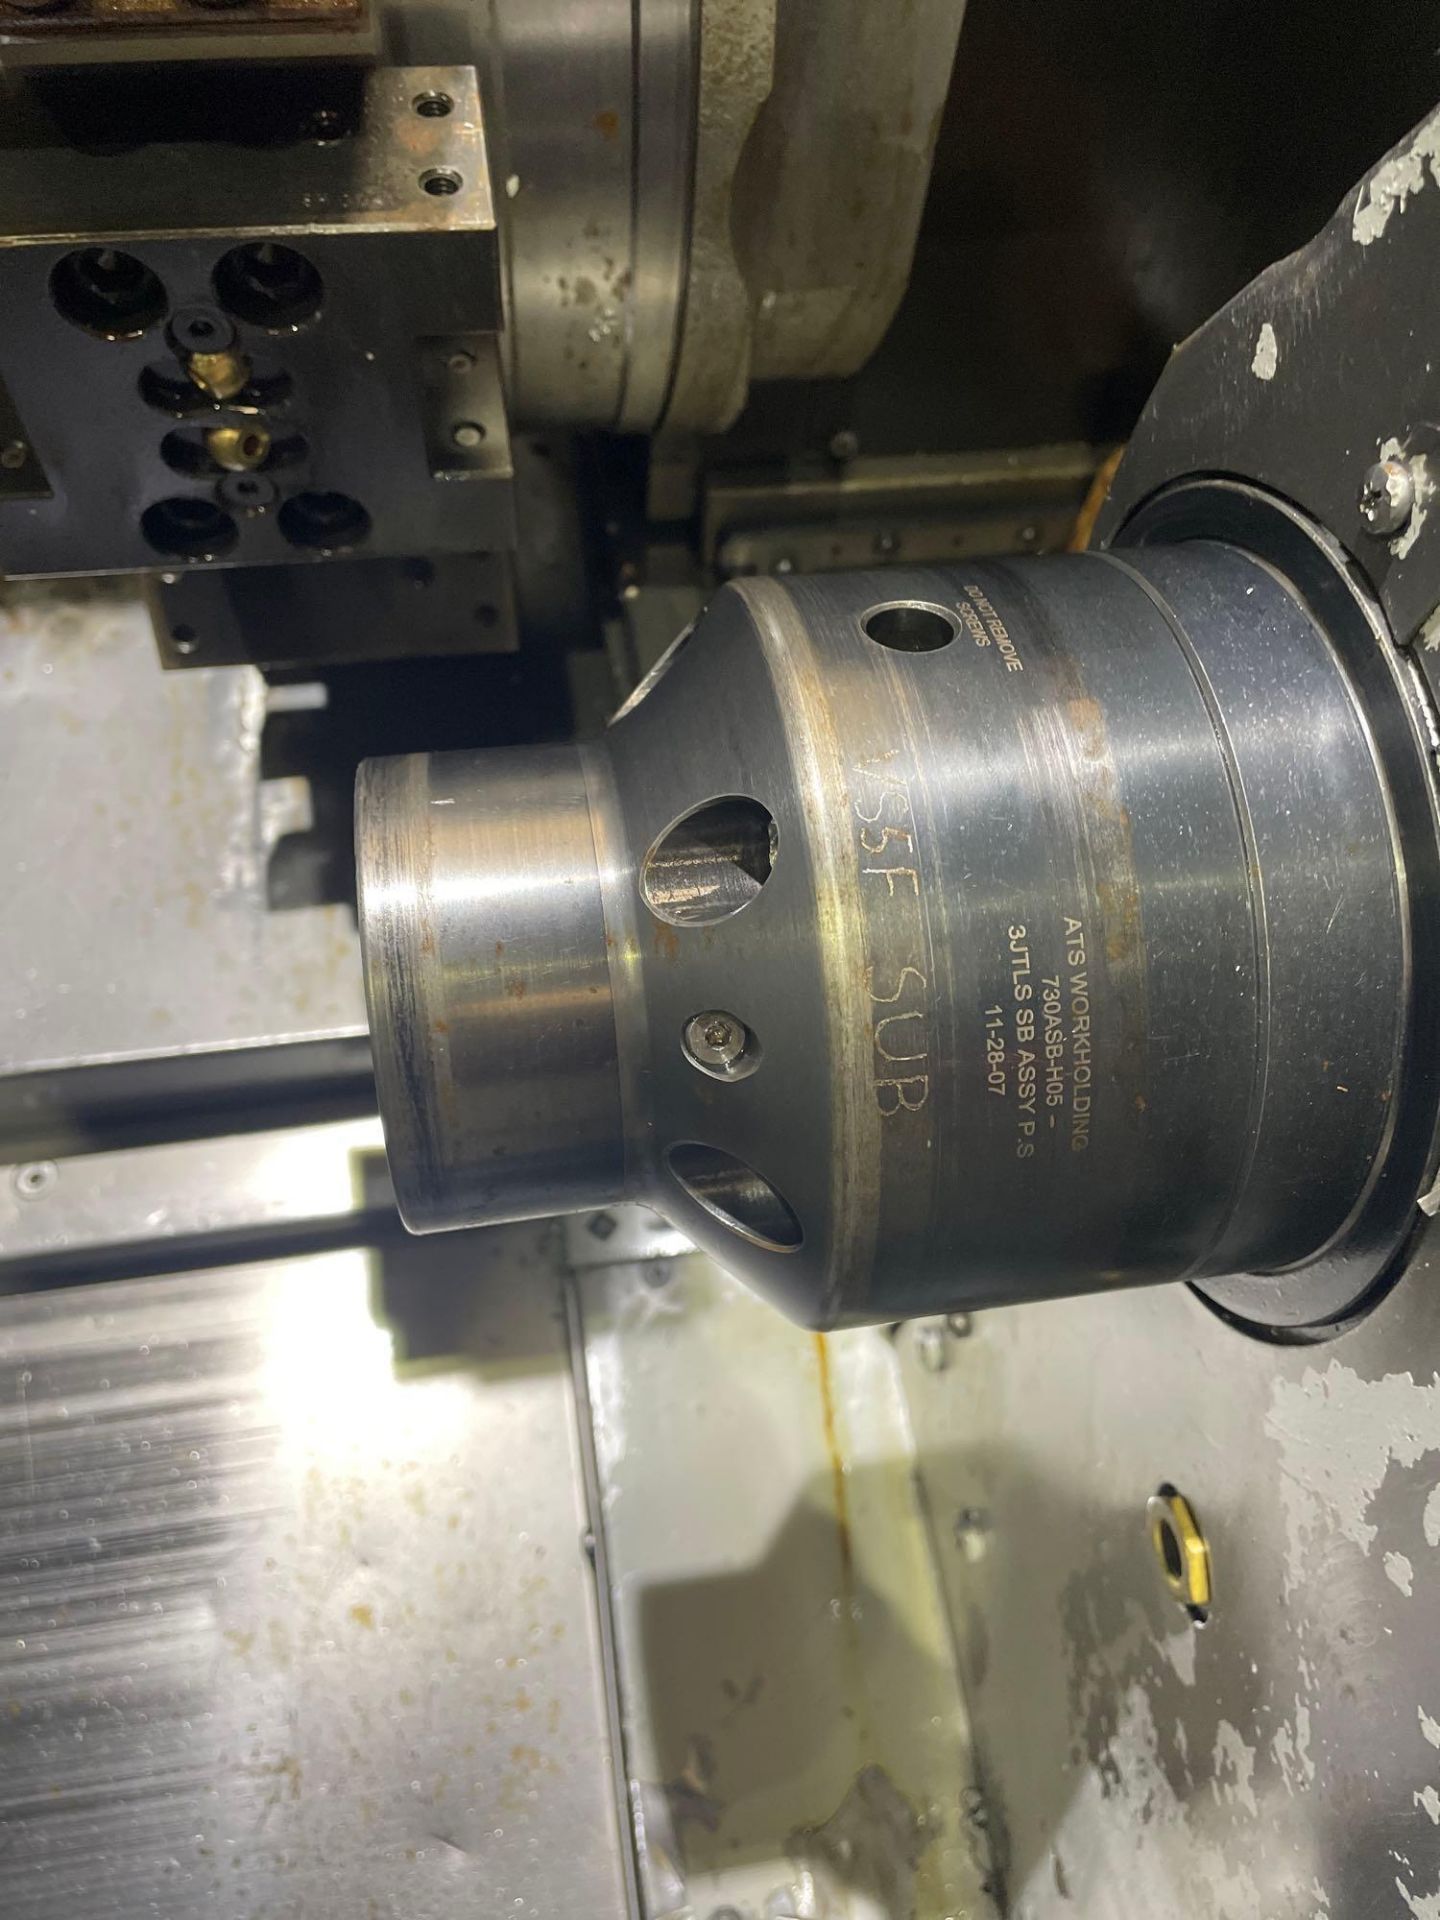 Mori Seiki SL-150S CNC Turning Center with Sub Spindle - Image 10 of 24